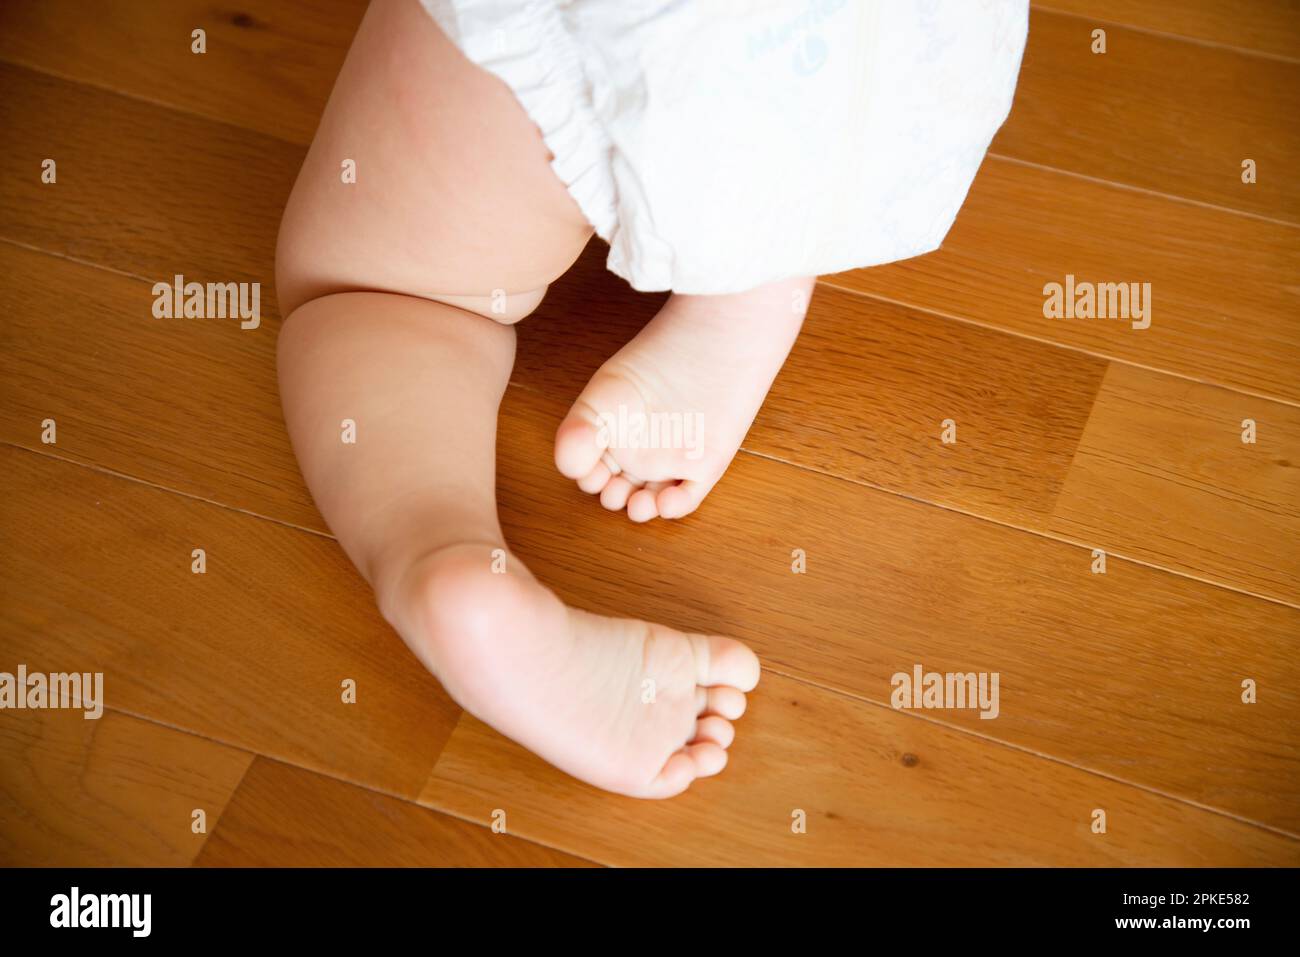 Baby's feet in diaper crawling Stock Photo